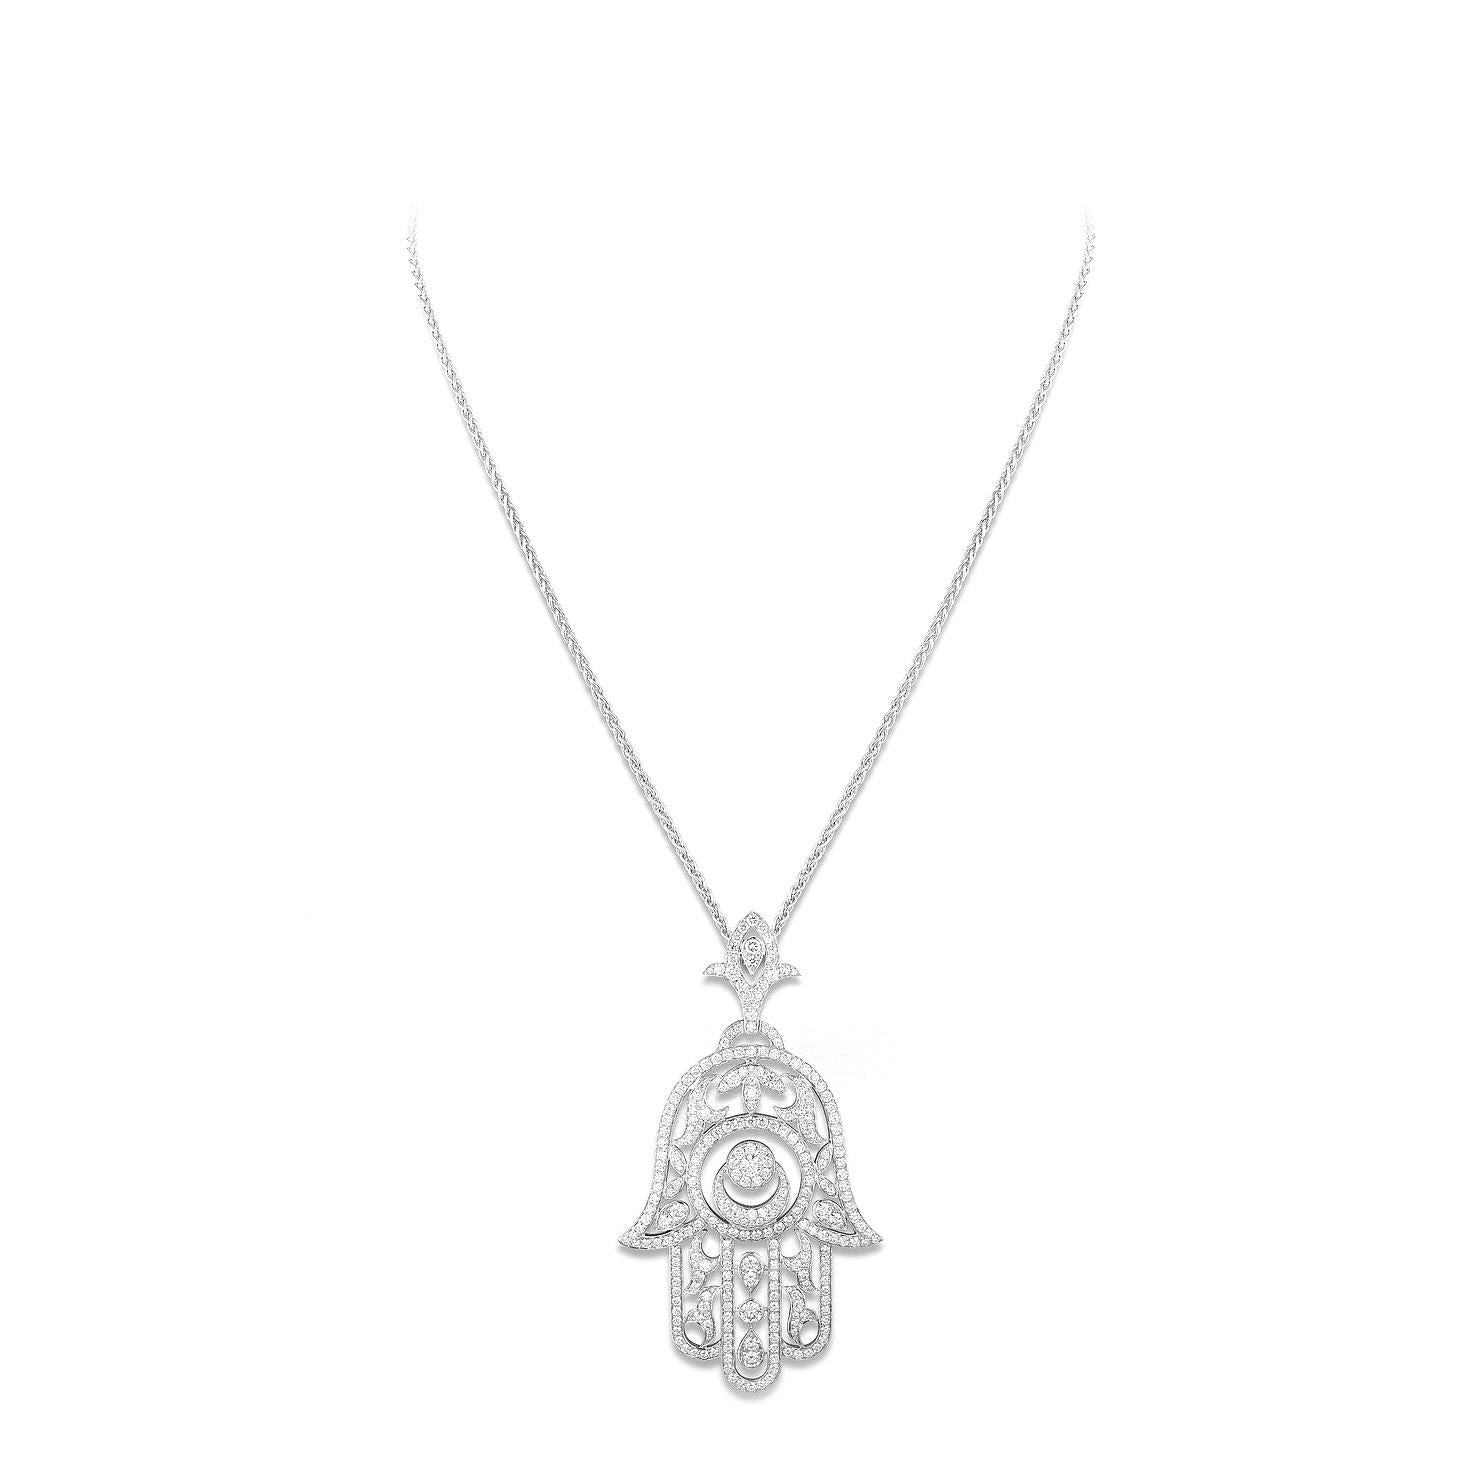 Fatma Hand pendant in 18kt white gold set with 305 diamonds 8.71 cts big model   